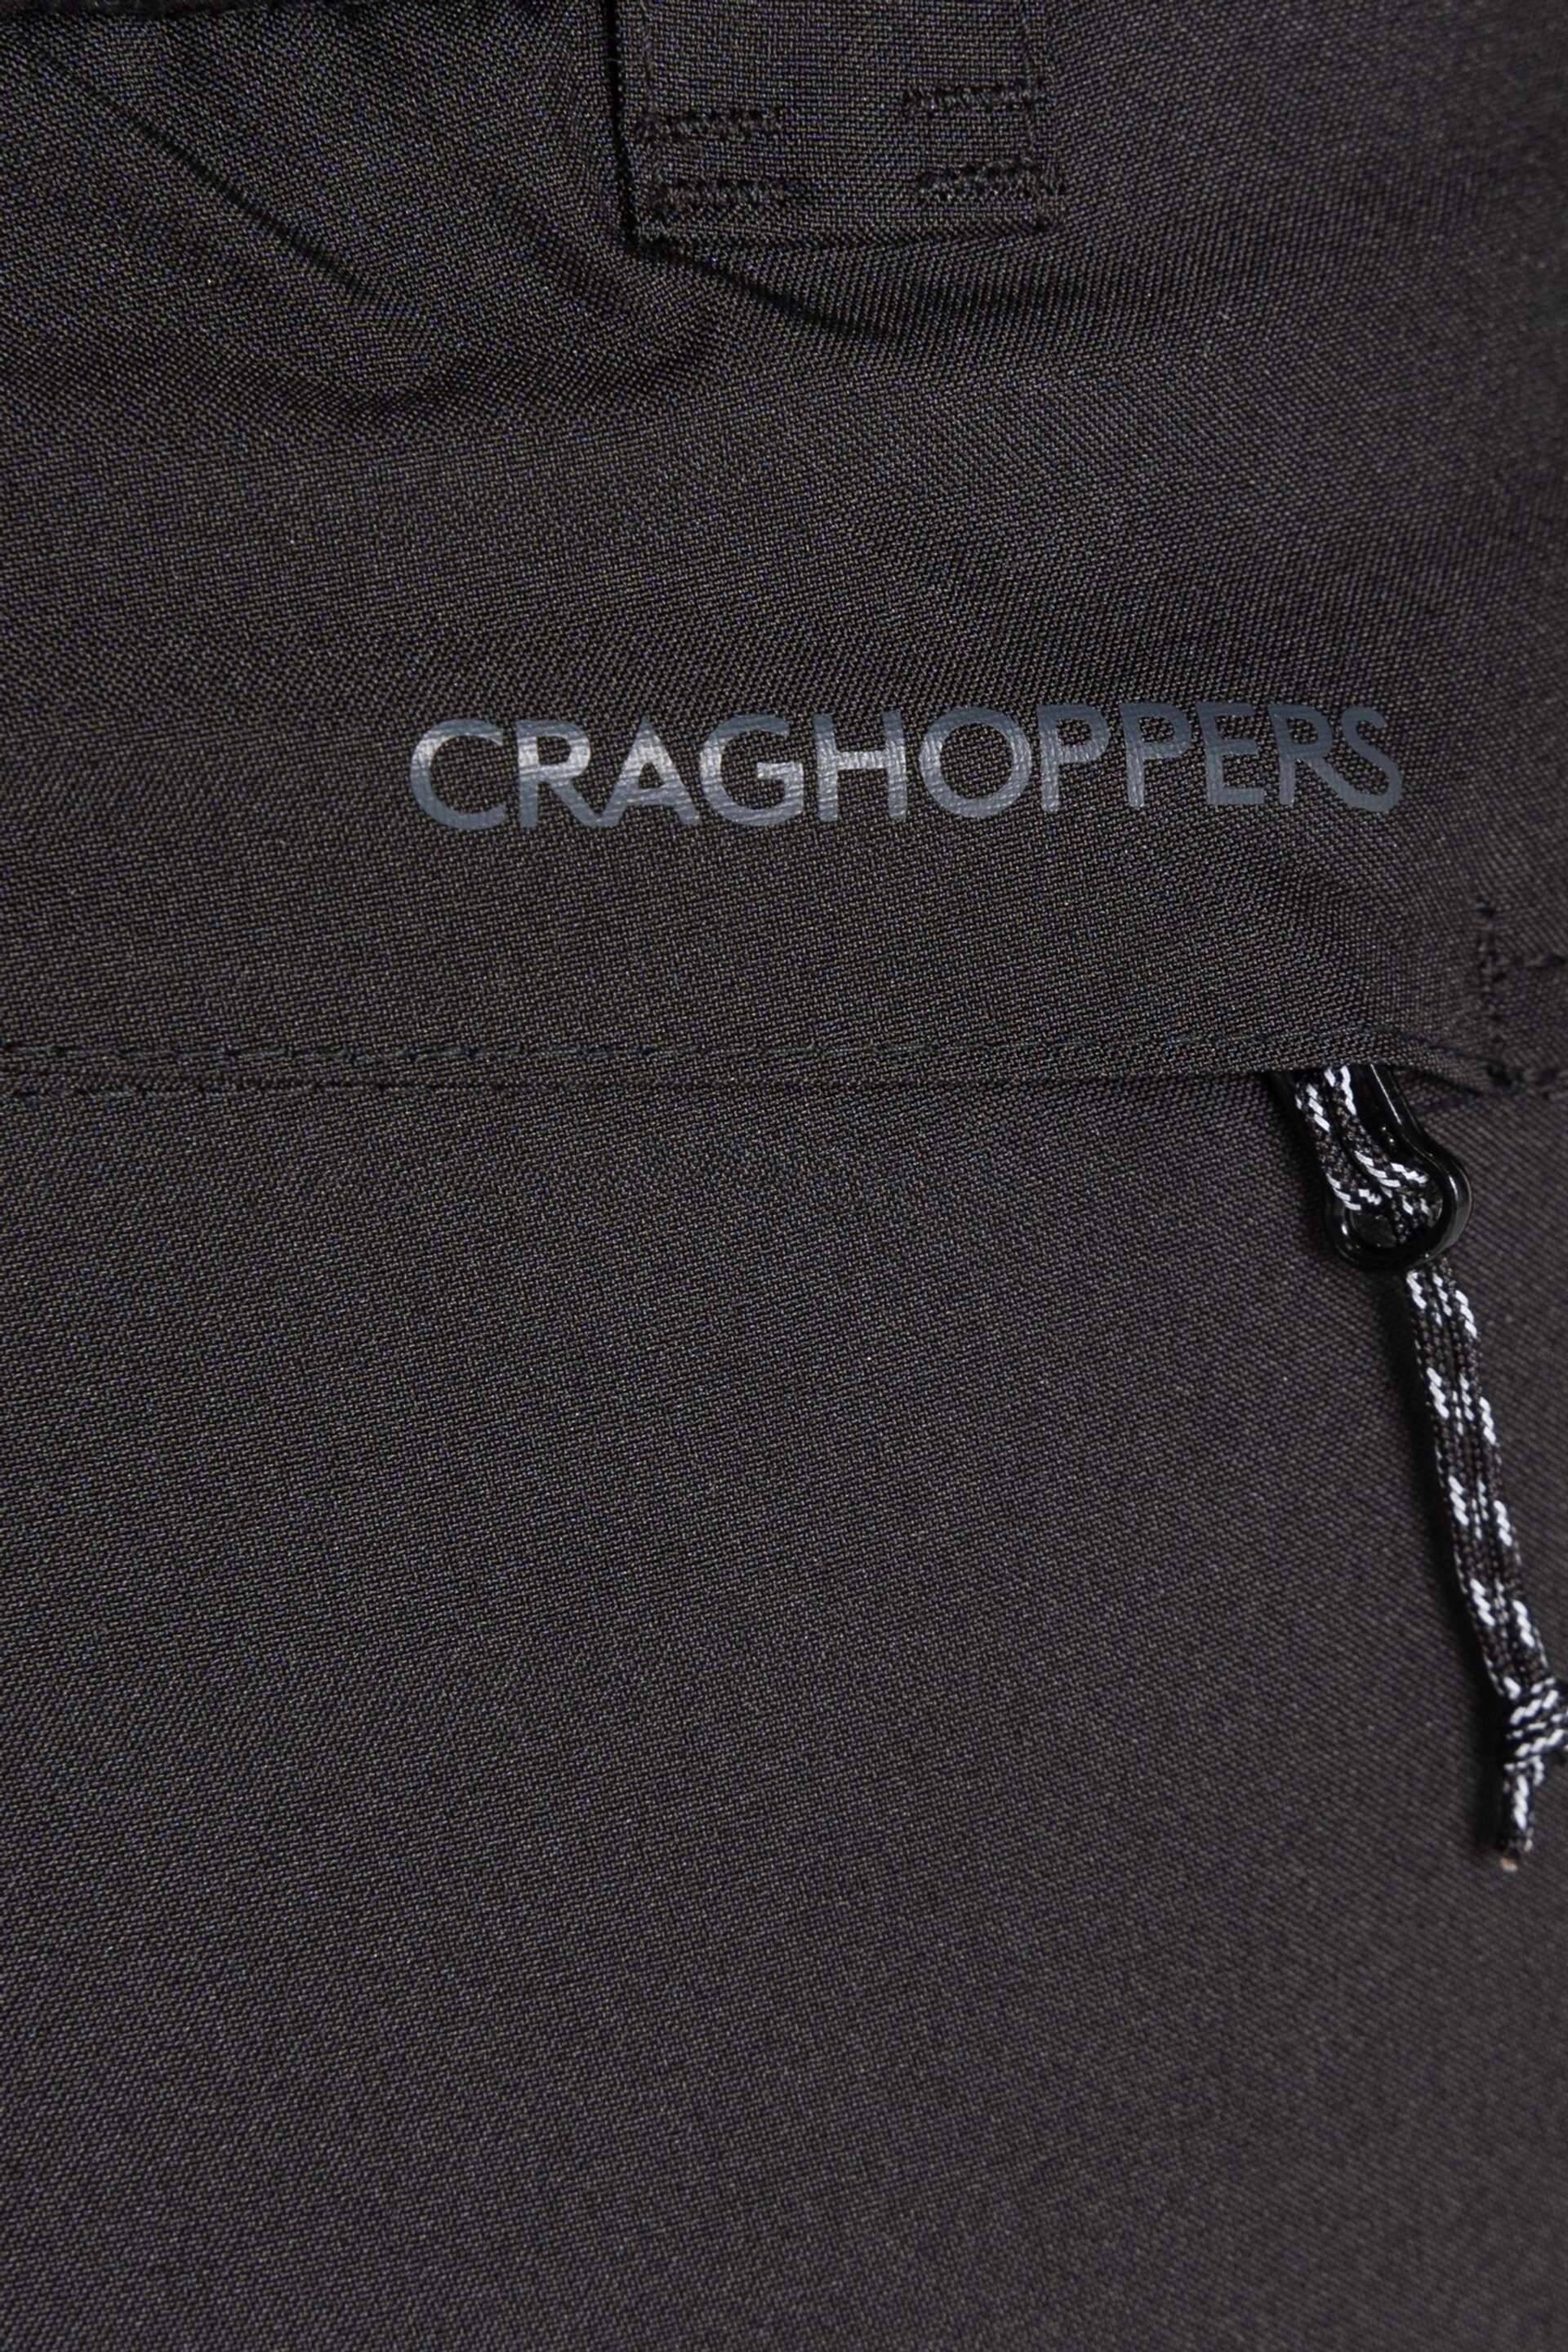 Craghoppers Aysgarth Black Thermo Trousers - Image 5 of 6